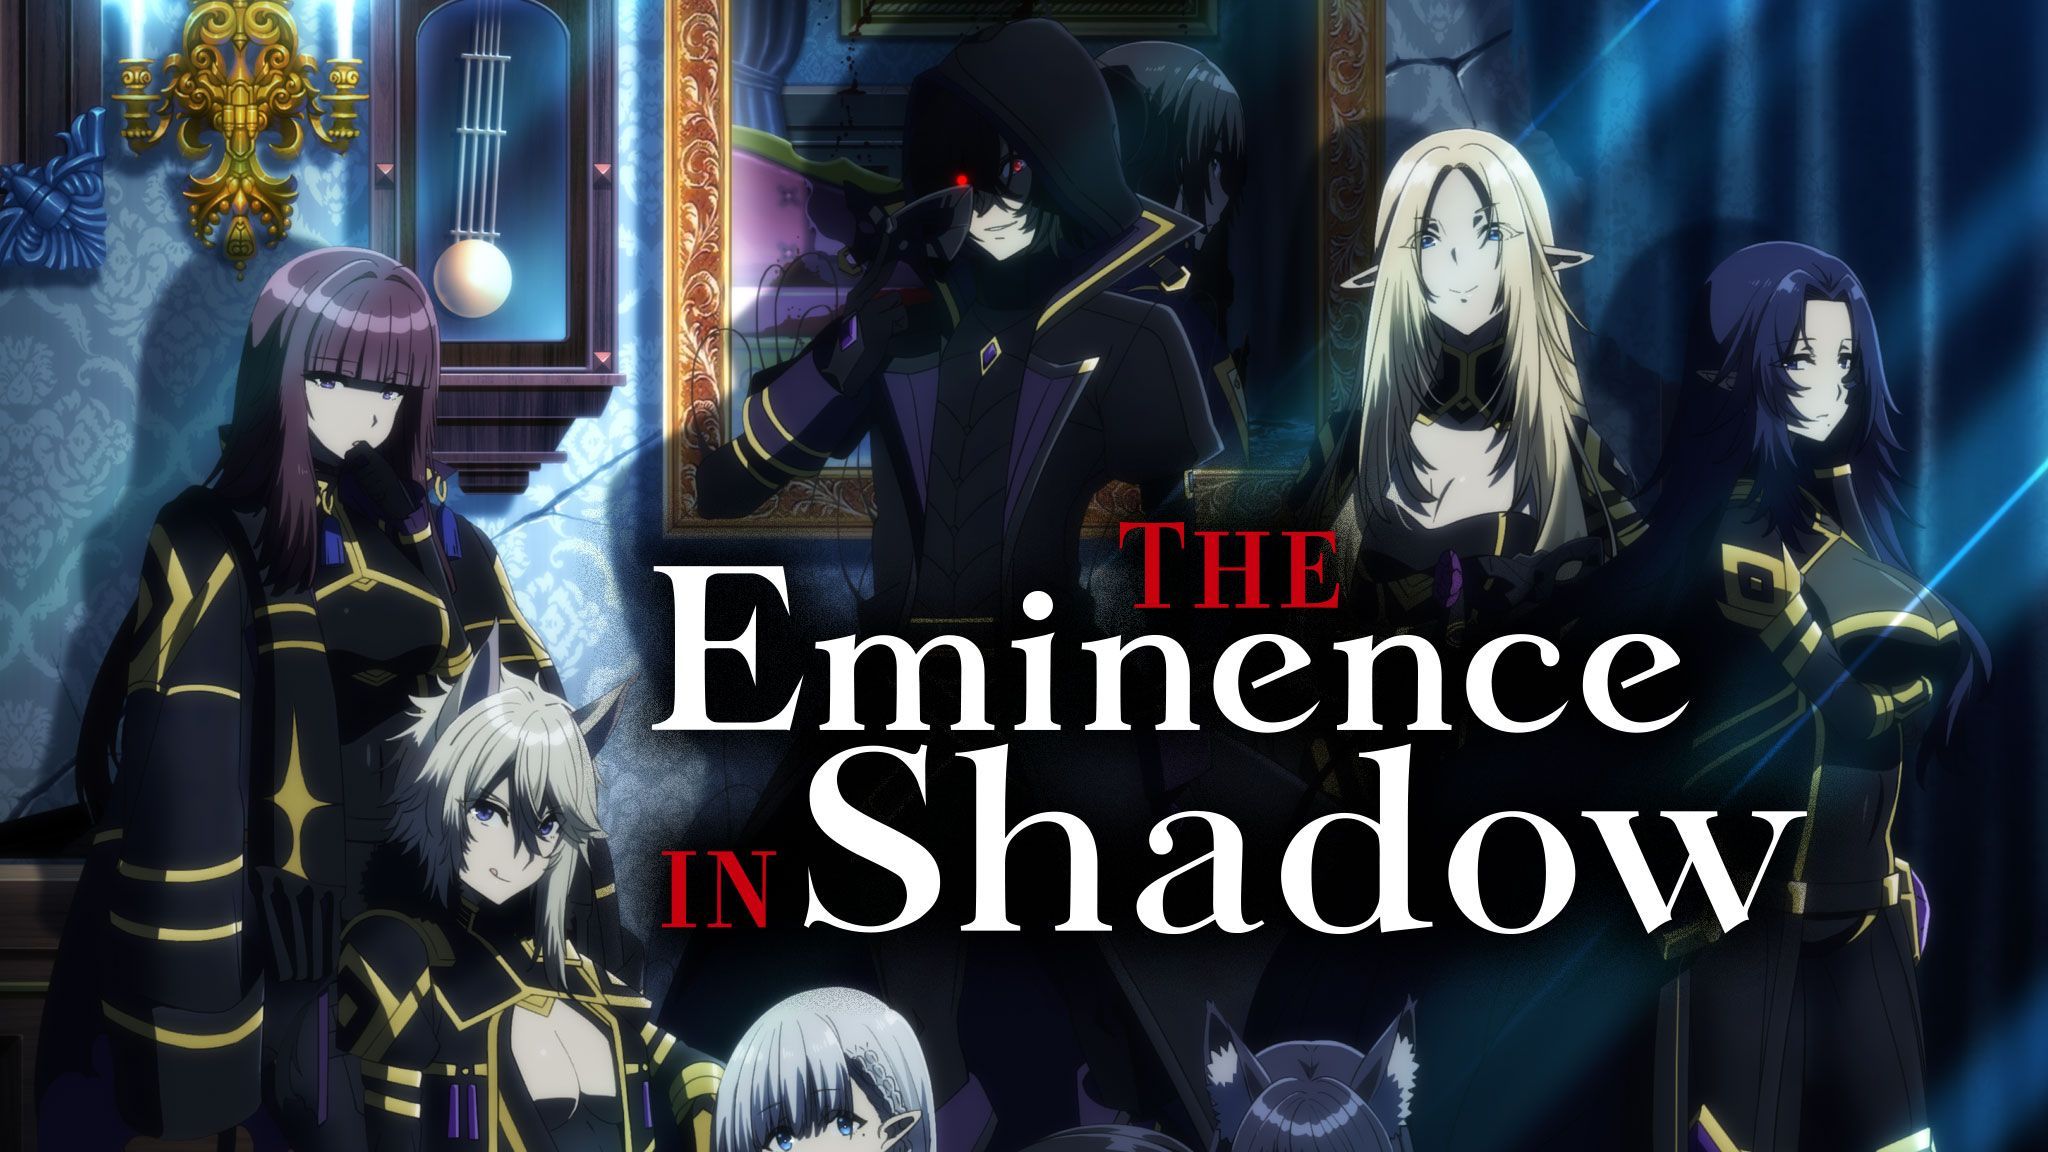 The Eminence in Shadow Season 2 Episode 3 English Dub spoilers